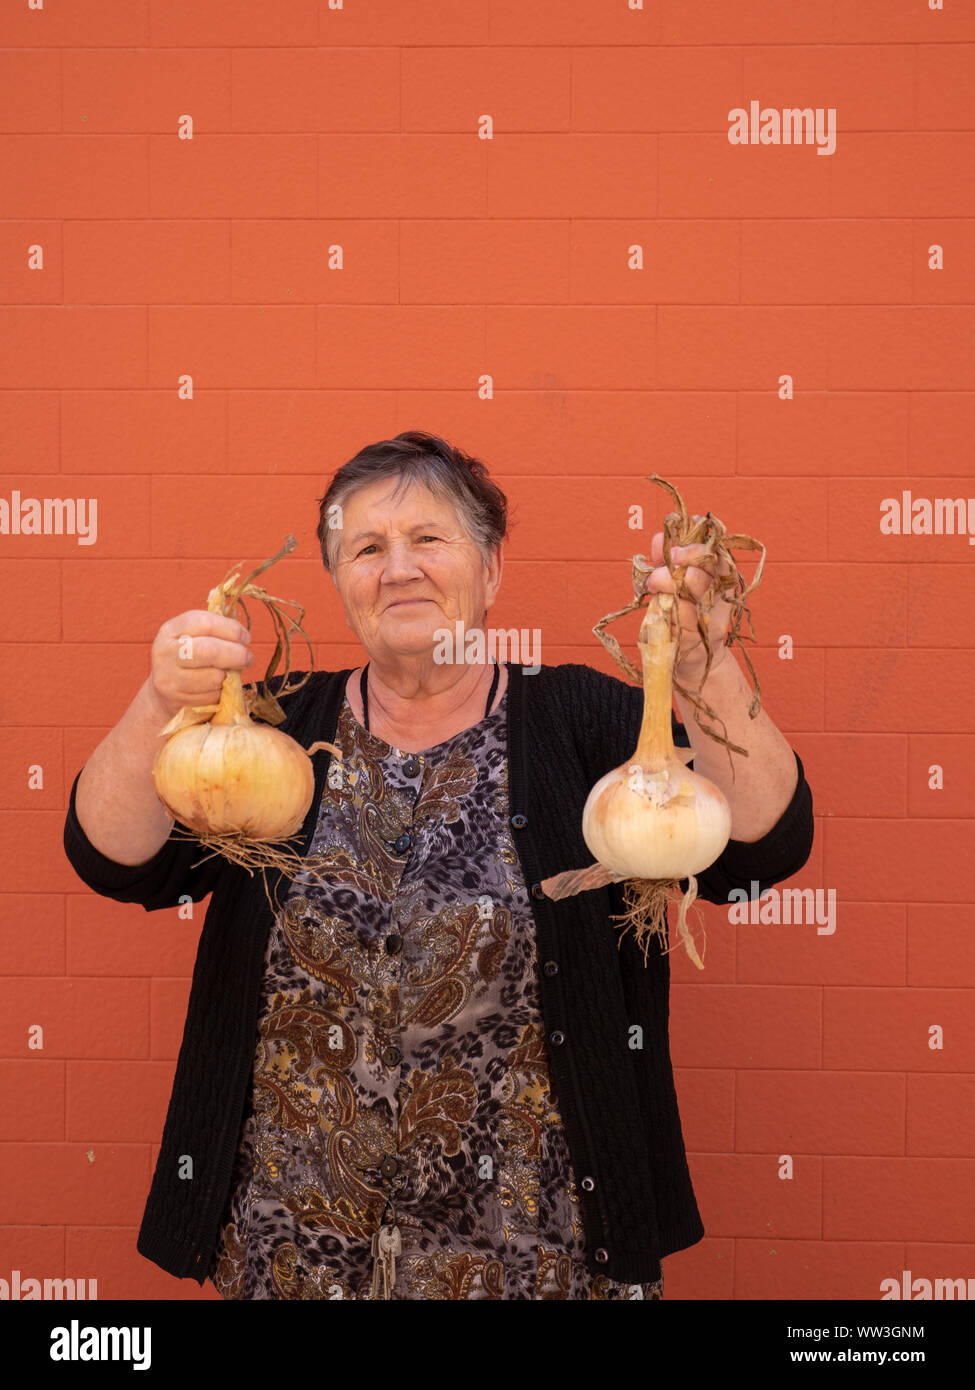 Old woman showing off her home grown onions, Galicia, Spain Stock Photo